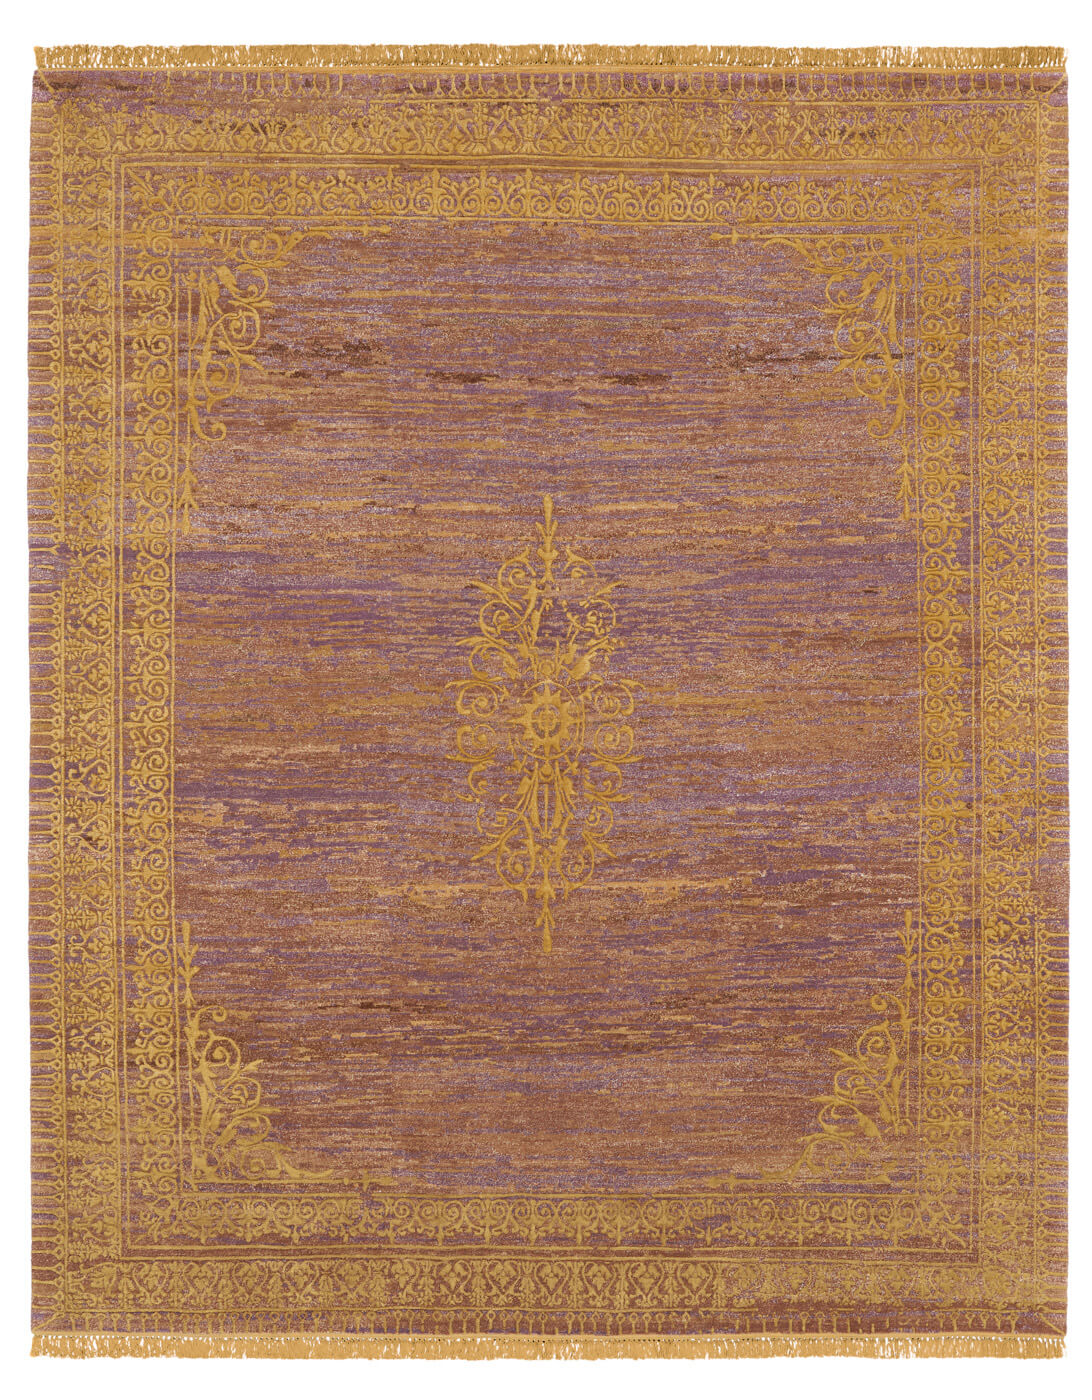 Hand-woven Vintage Style Brown Luxury Rug ☞ Size: 200 x 300 cm